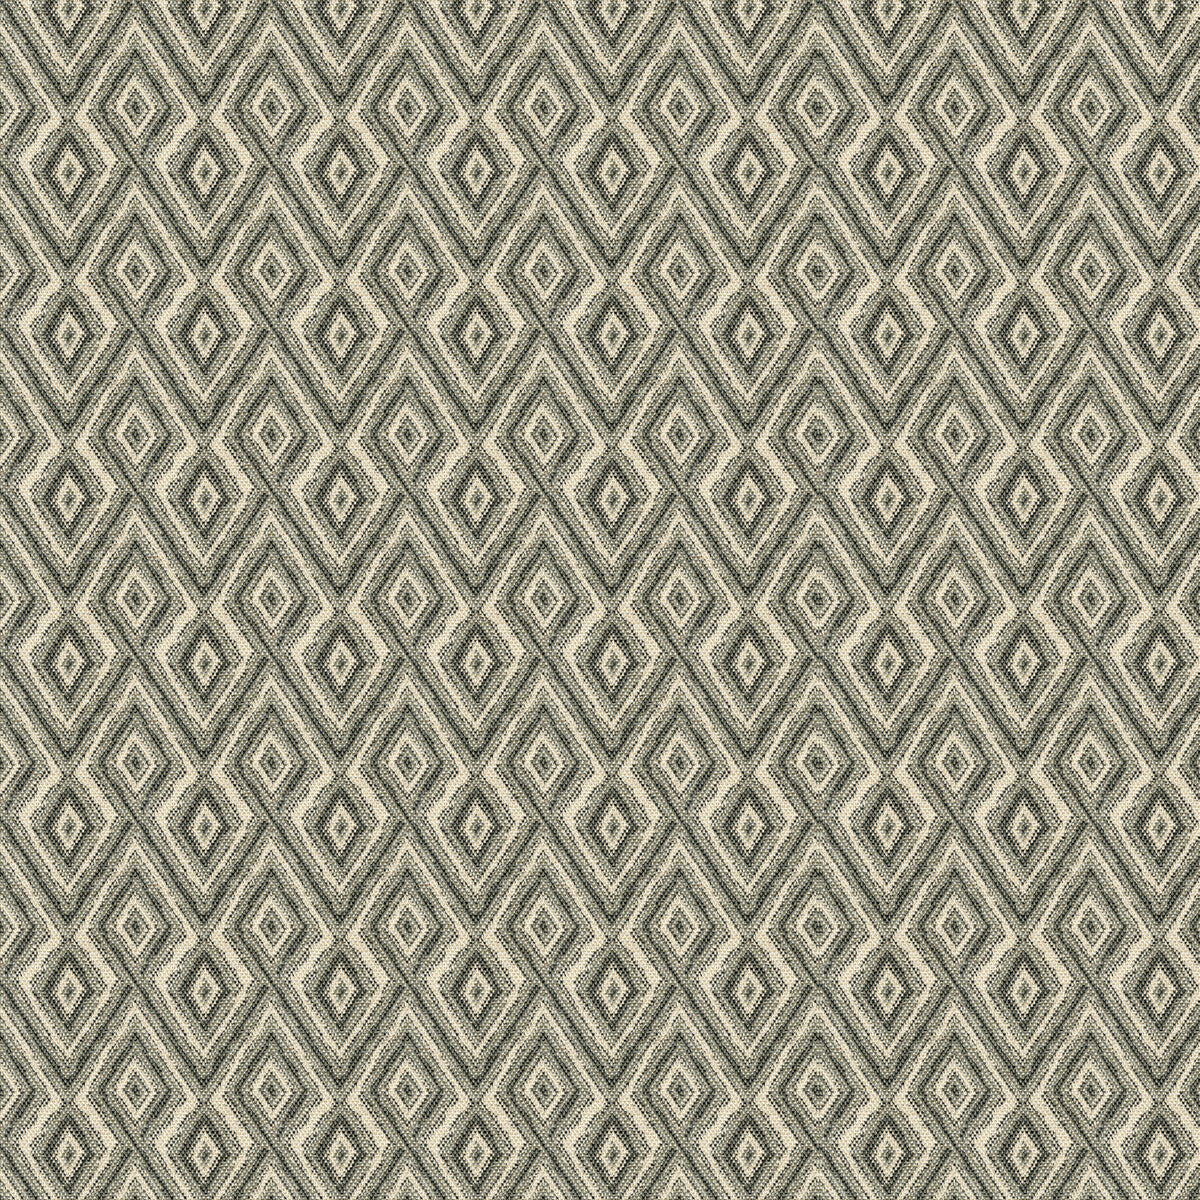 Kravet Design fabric in 33881-1611 color - pattern 33881.1611.0 - by Kravet Design in the Tanzania J Banks collection